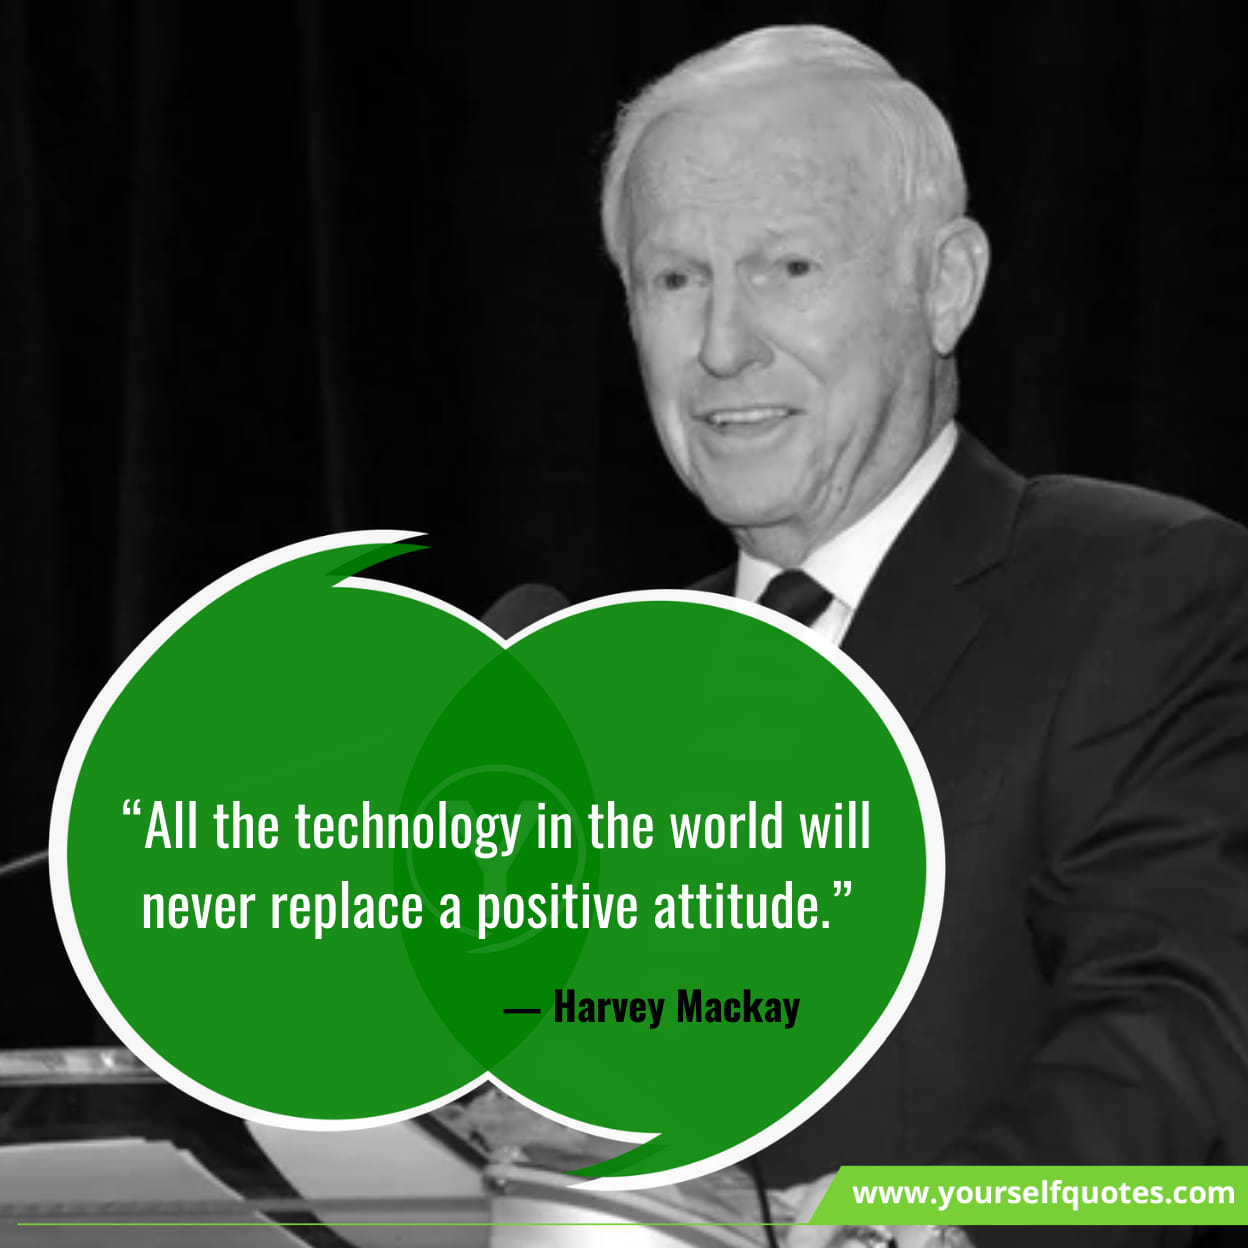 Inspiring Technology Quotes